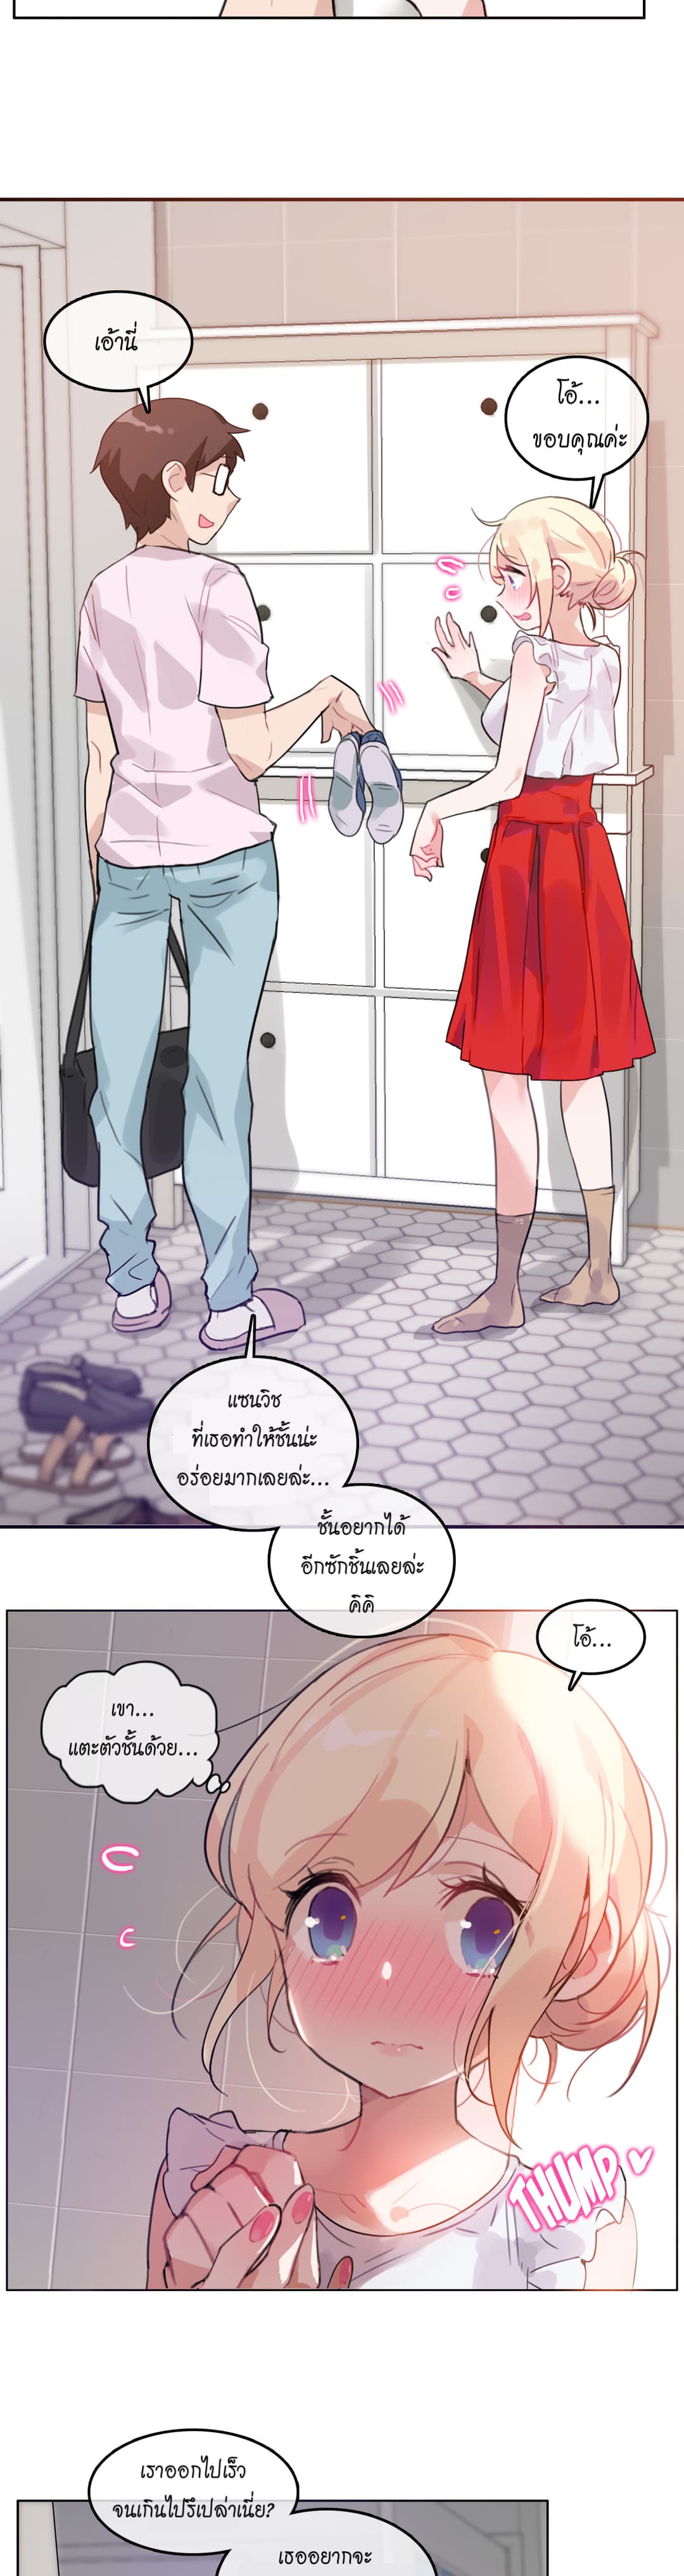 A Pervert’s Daily Life 16 (2)